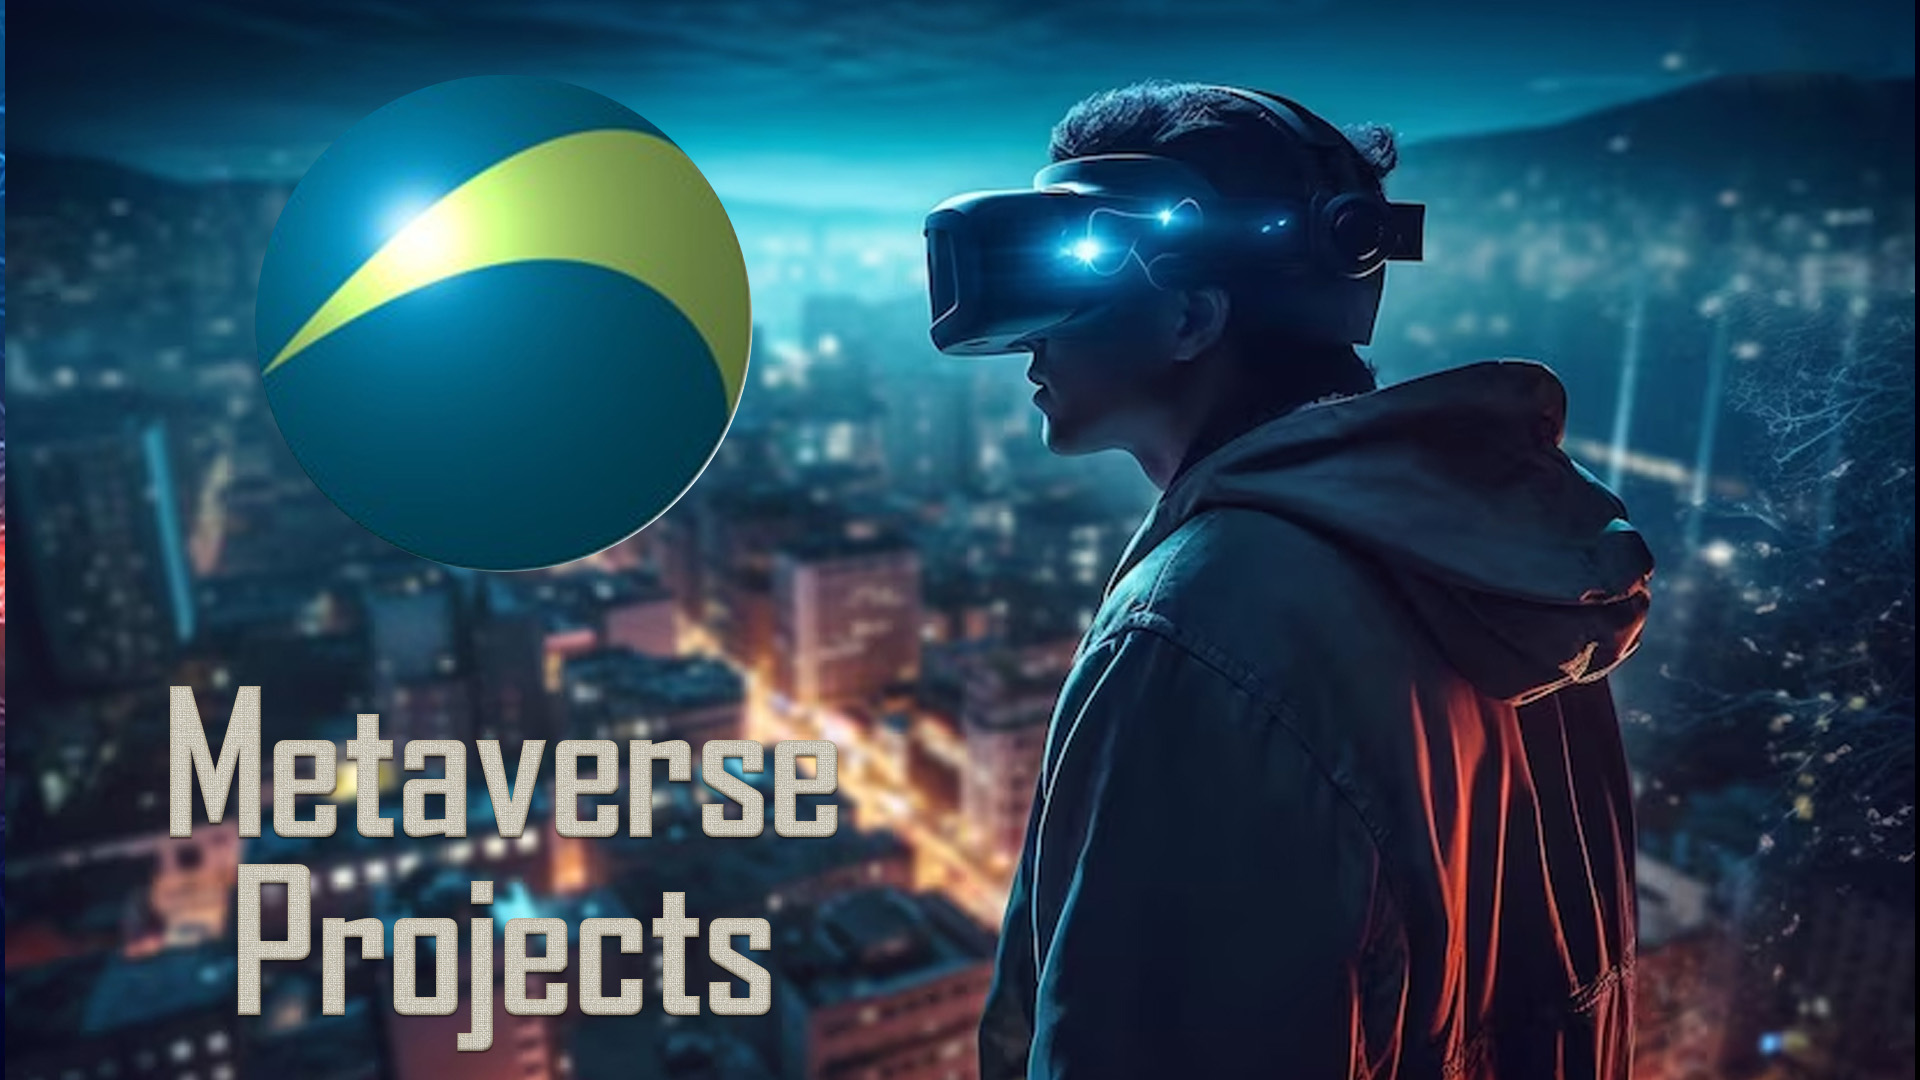 Canalys Predicts Closure of All Metaverse Projects by 2025